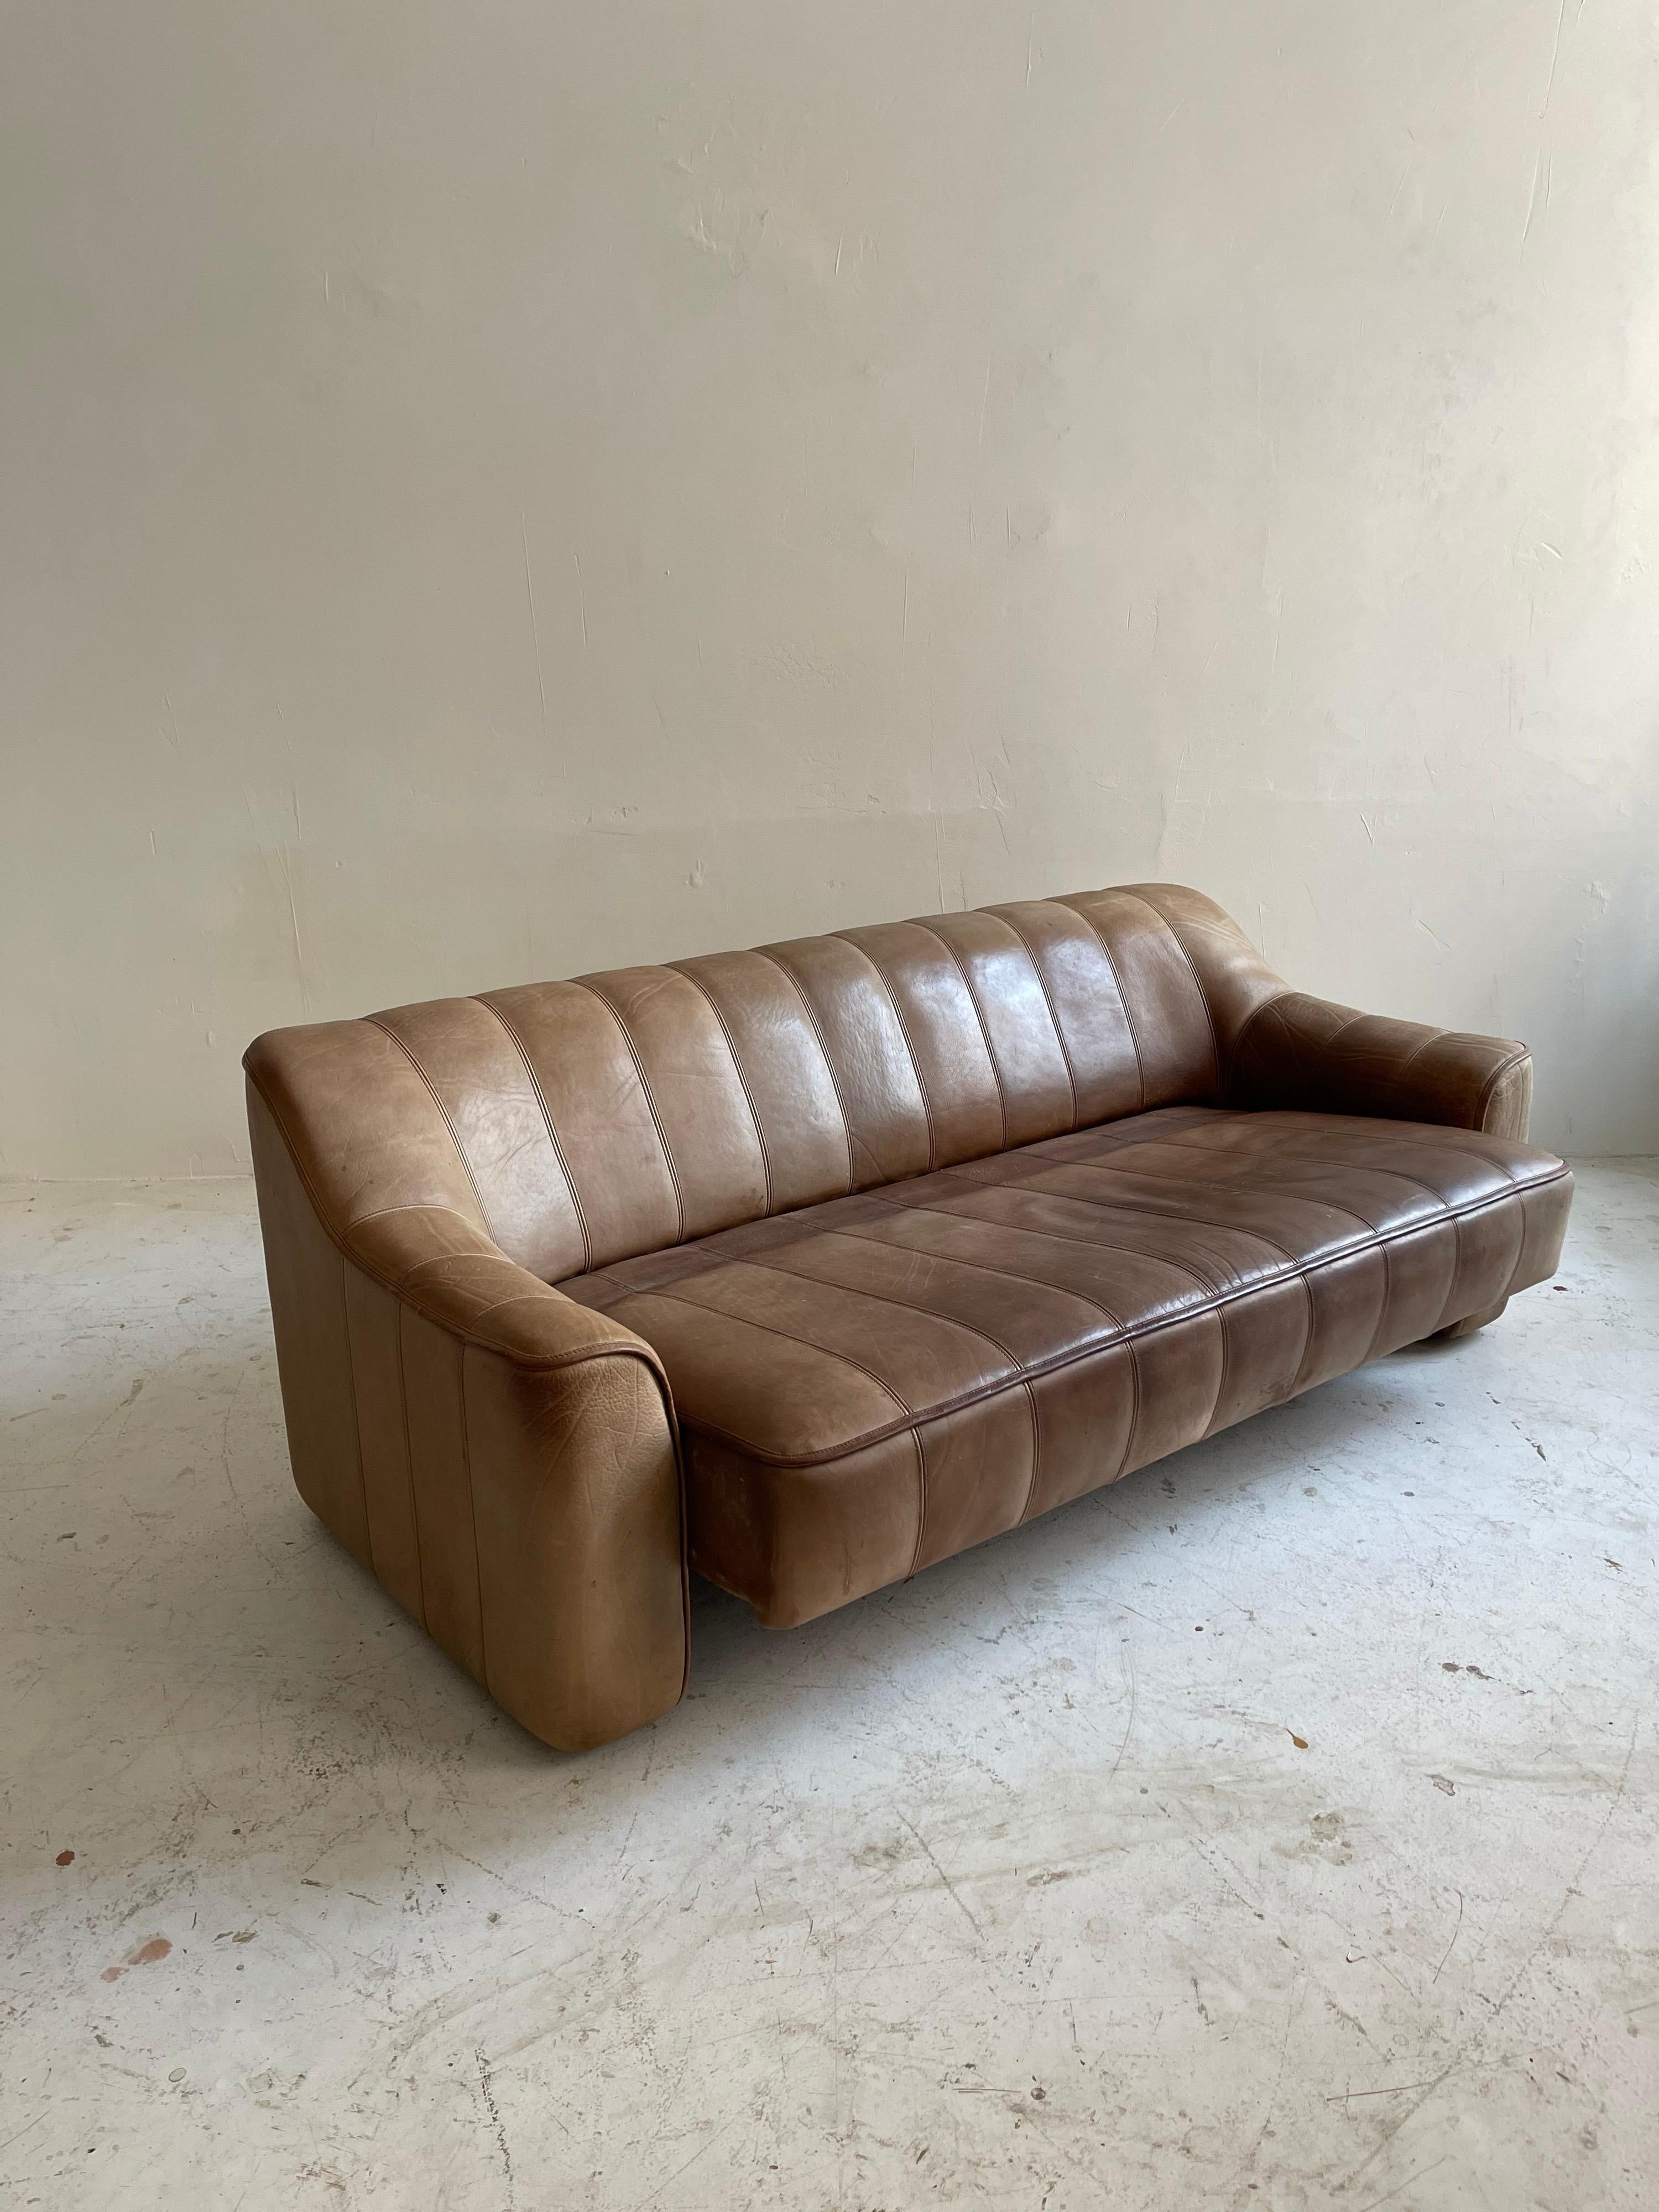 De Sede DS-44 Sofa in Patinated Cognac Buffalo Leather, Switzerland 1970. Three seater sofa with expendable seat area.